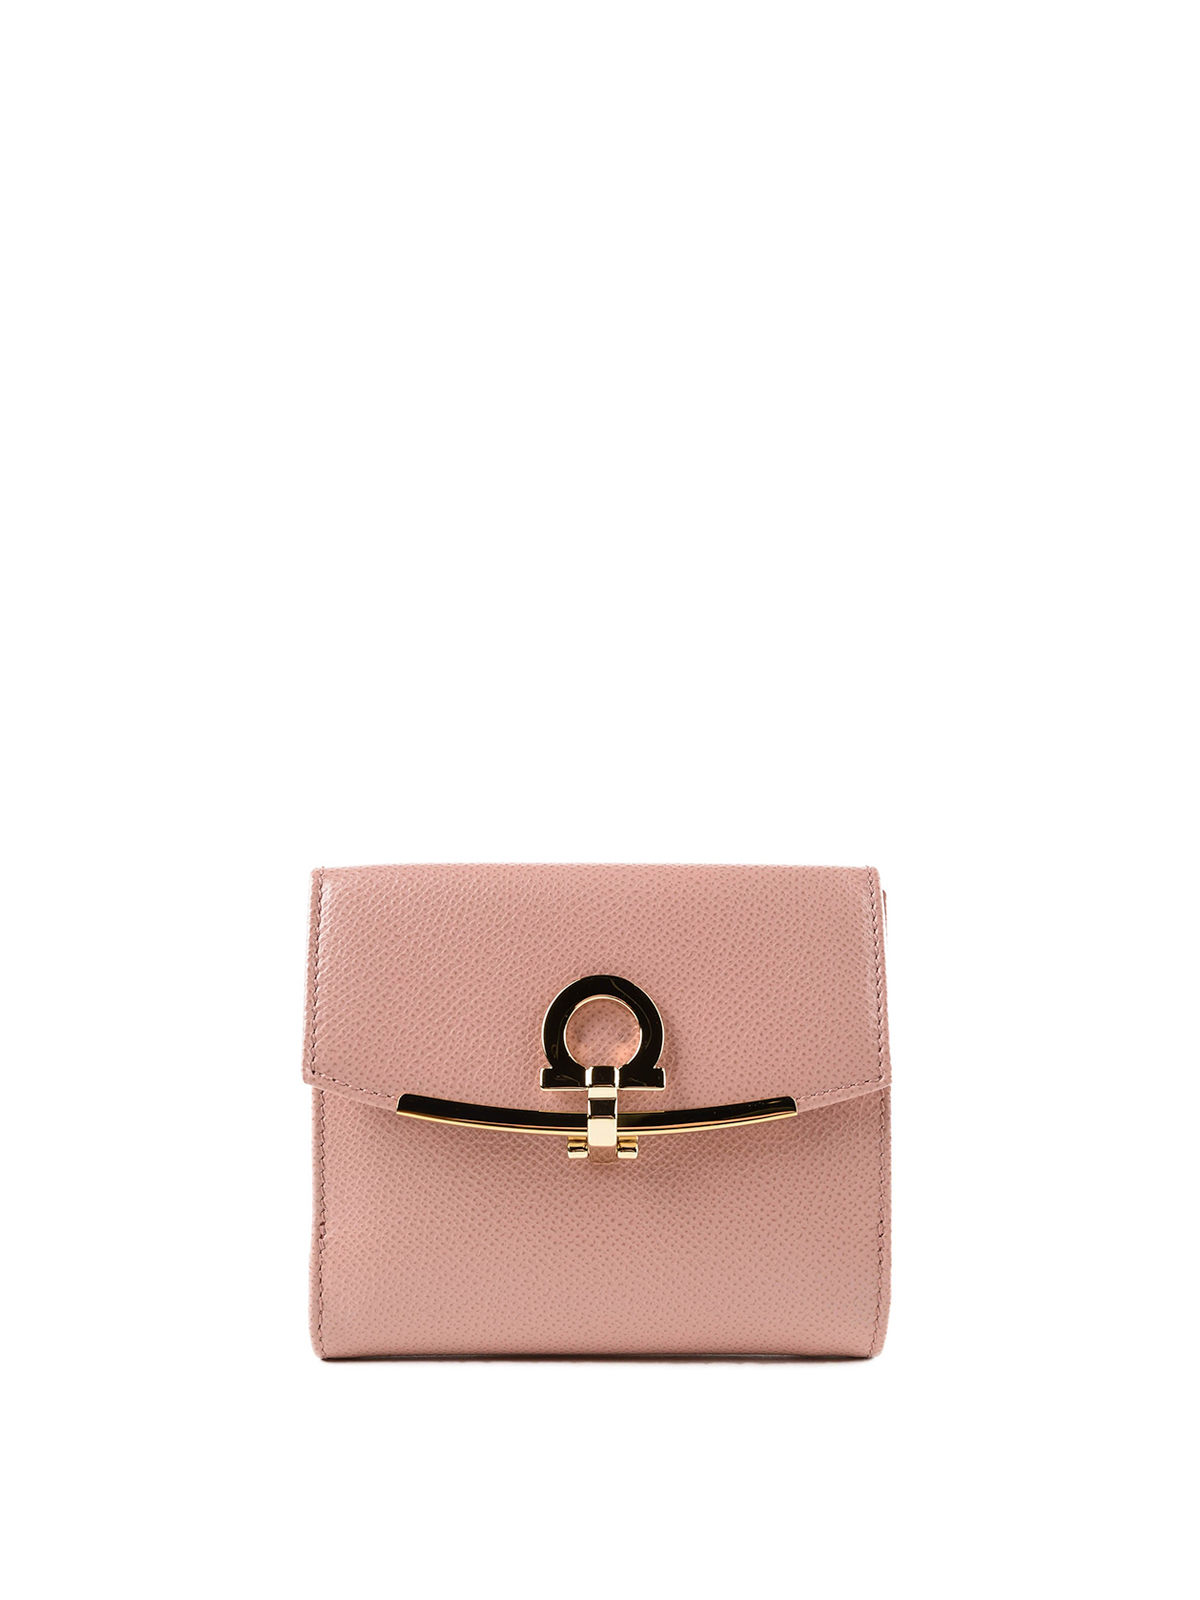 Womens Accessories Wallets and cardholders Ferragamo Leather Gancini Small Wallet in Pink Save 26% 